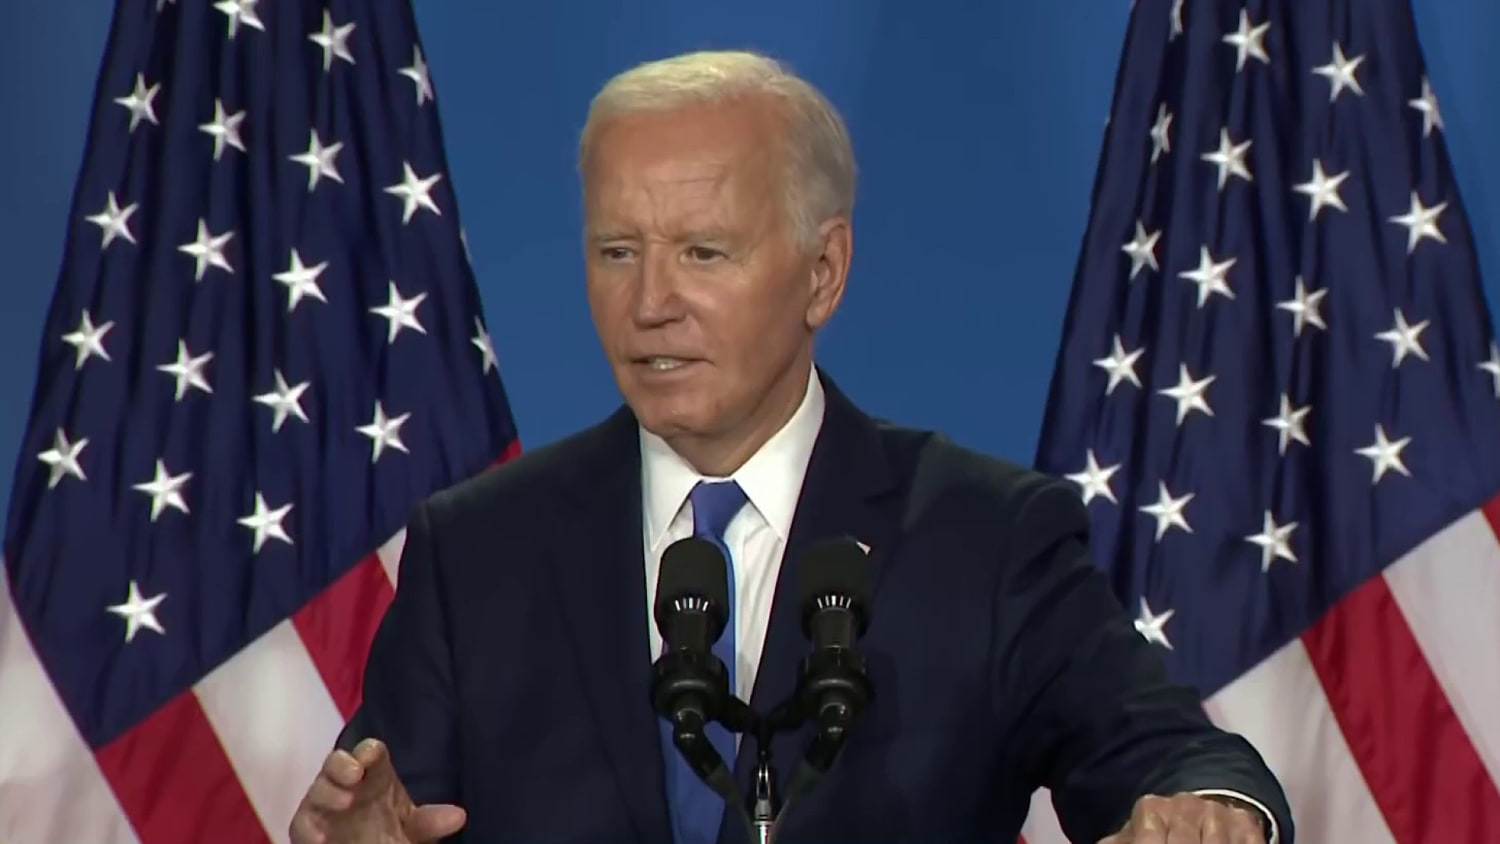 Biden says he would take another neurological exam amid health concerns